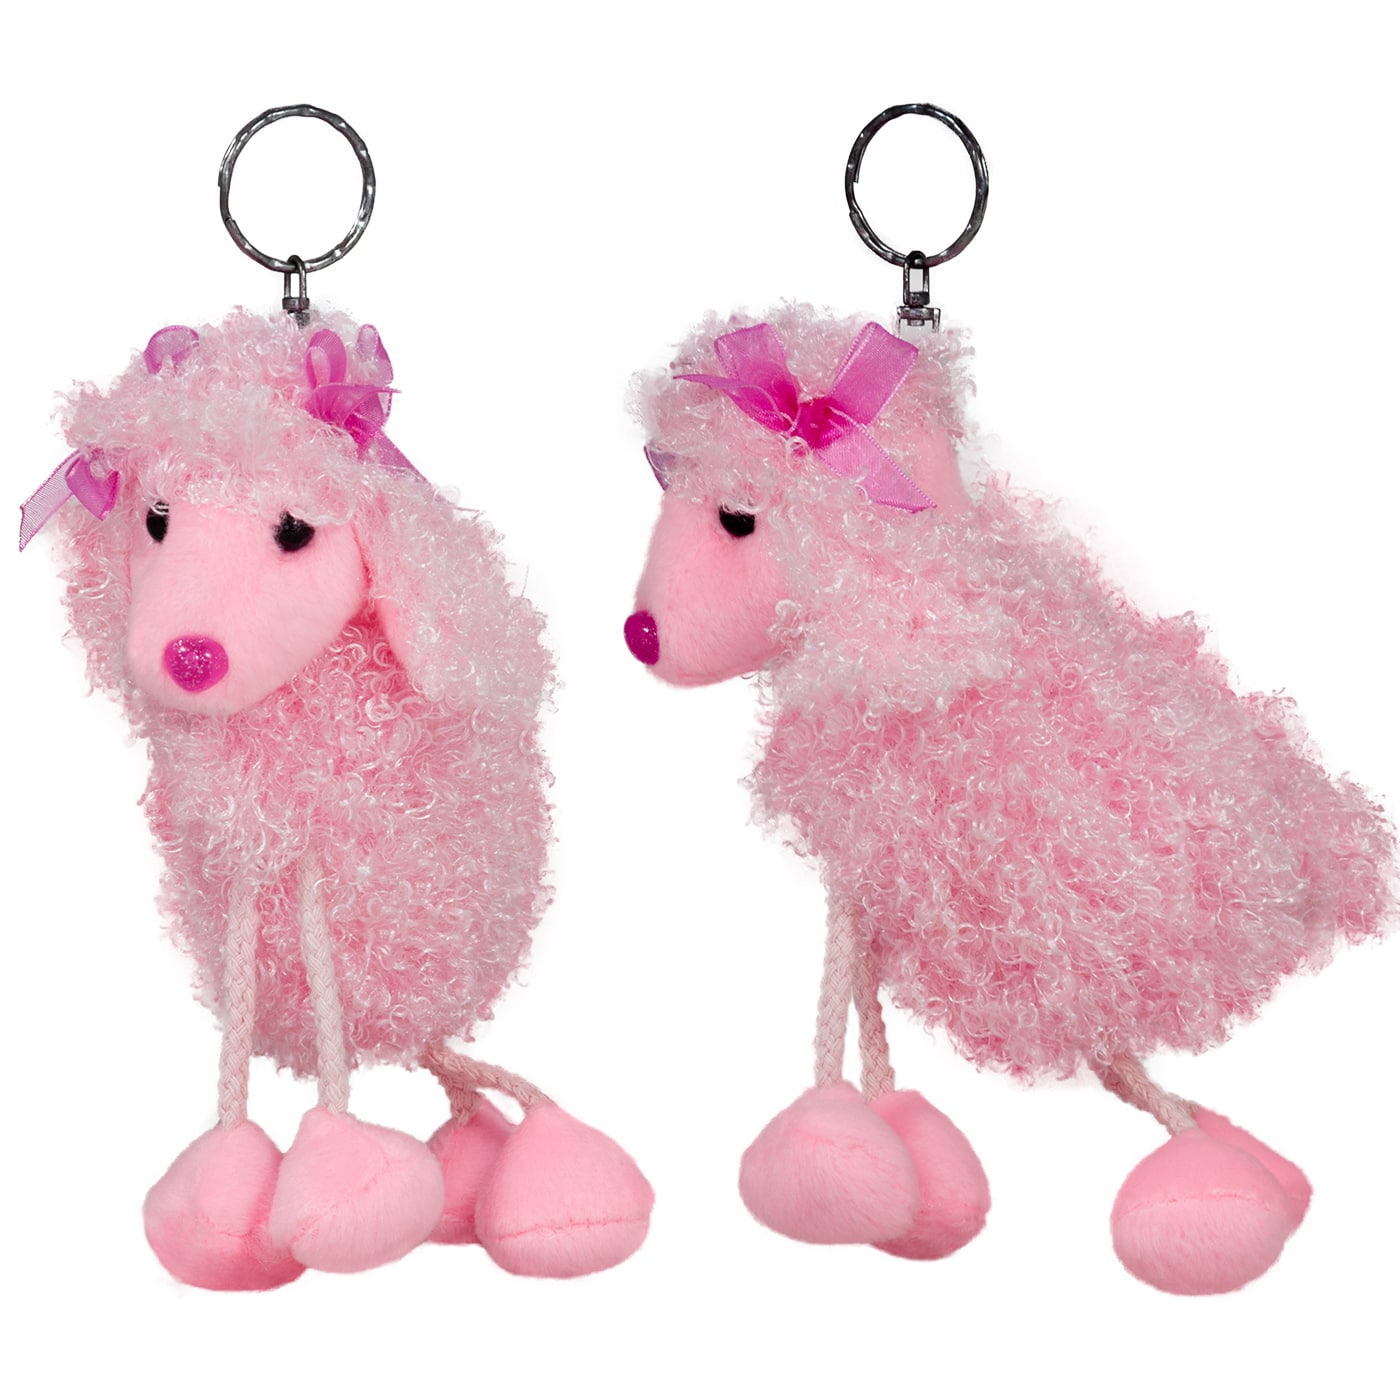 Purse with keychain - Poodle